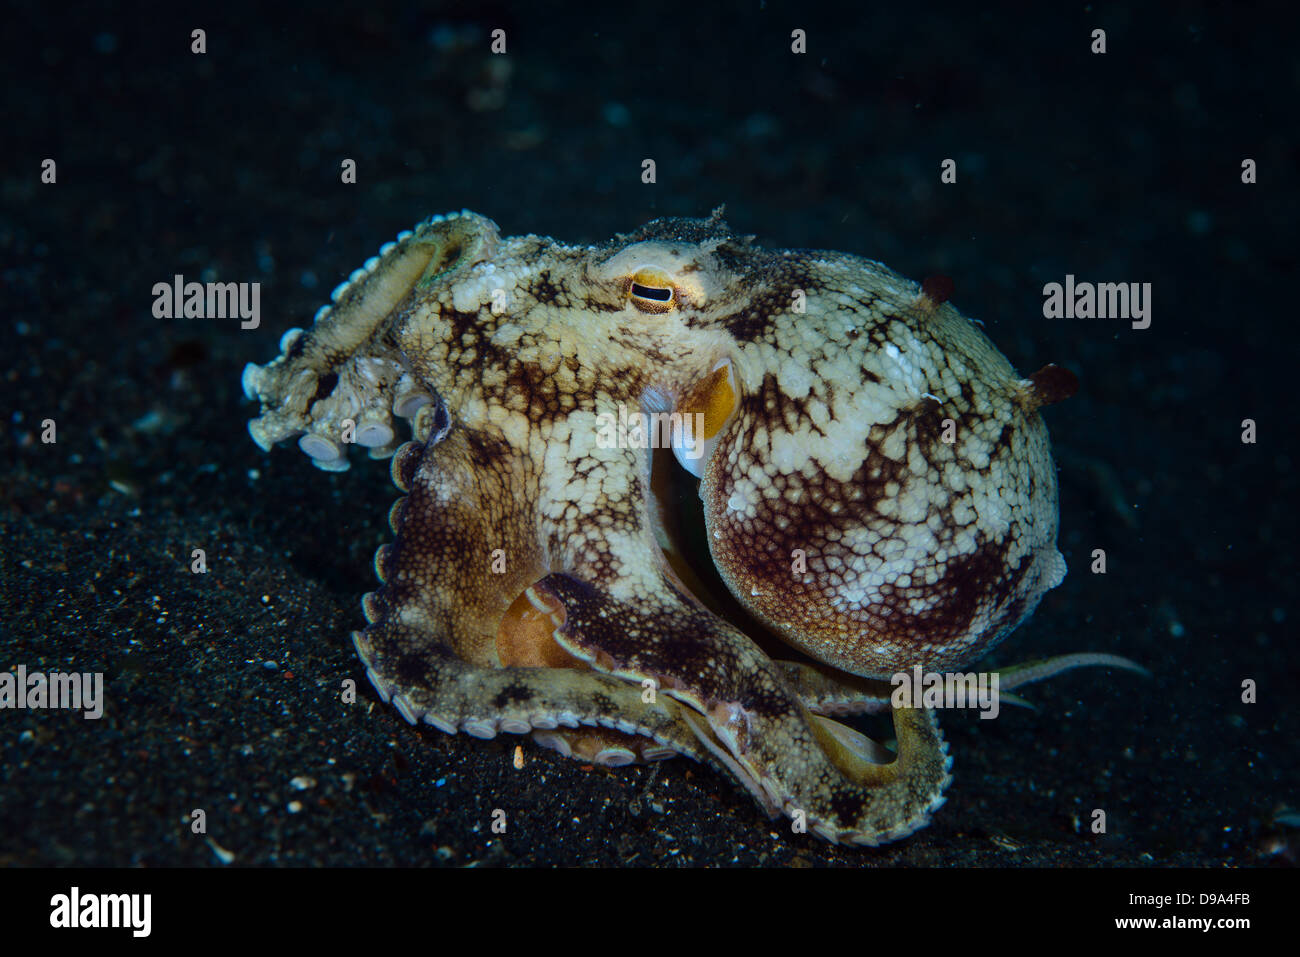 This Coconut octopus (Amphioctopus marginatus) was walking on the send using its tentacles. picture taken in Lembeh Strait. Stock Photo